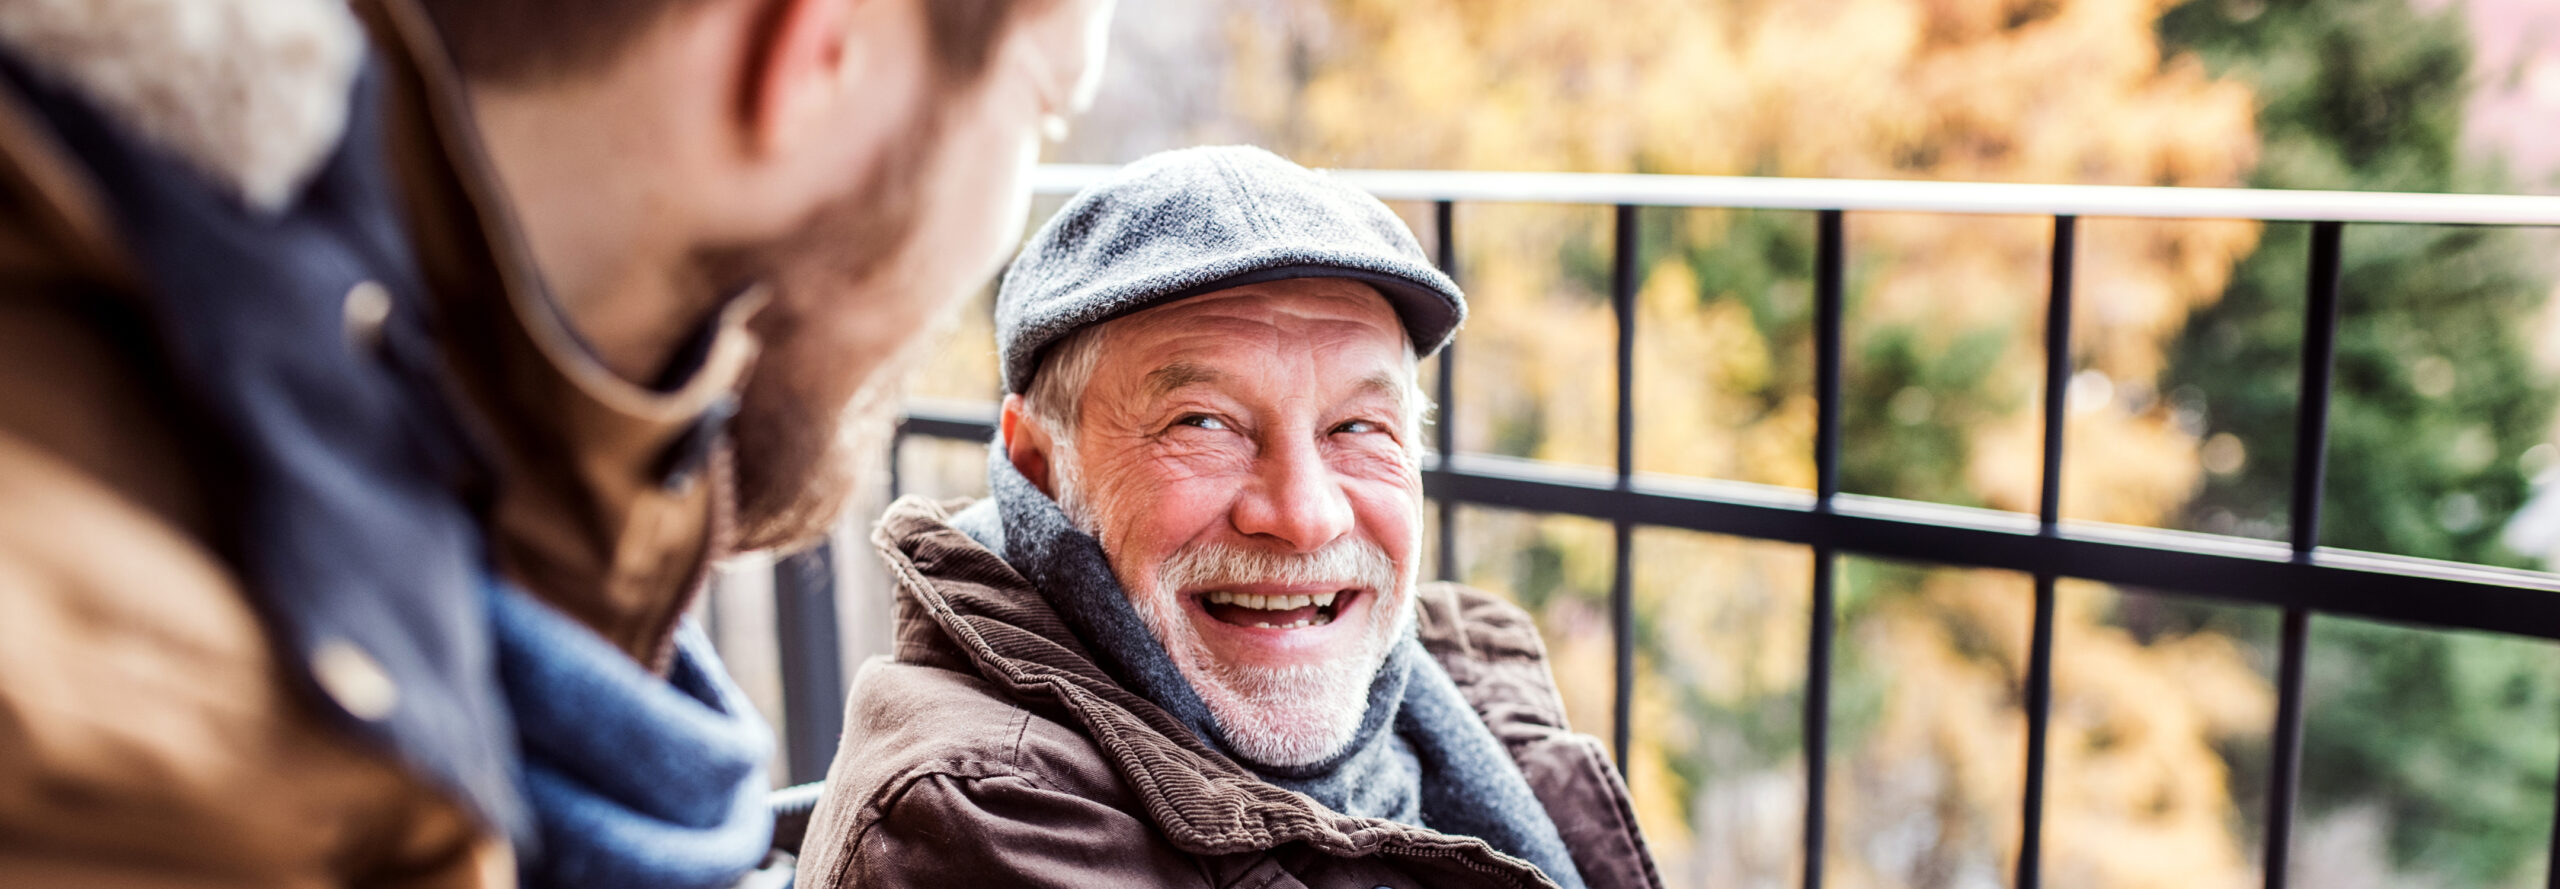 Older gentleman wearing a hat and coat outside laughs with yonger gentleman